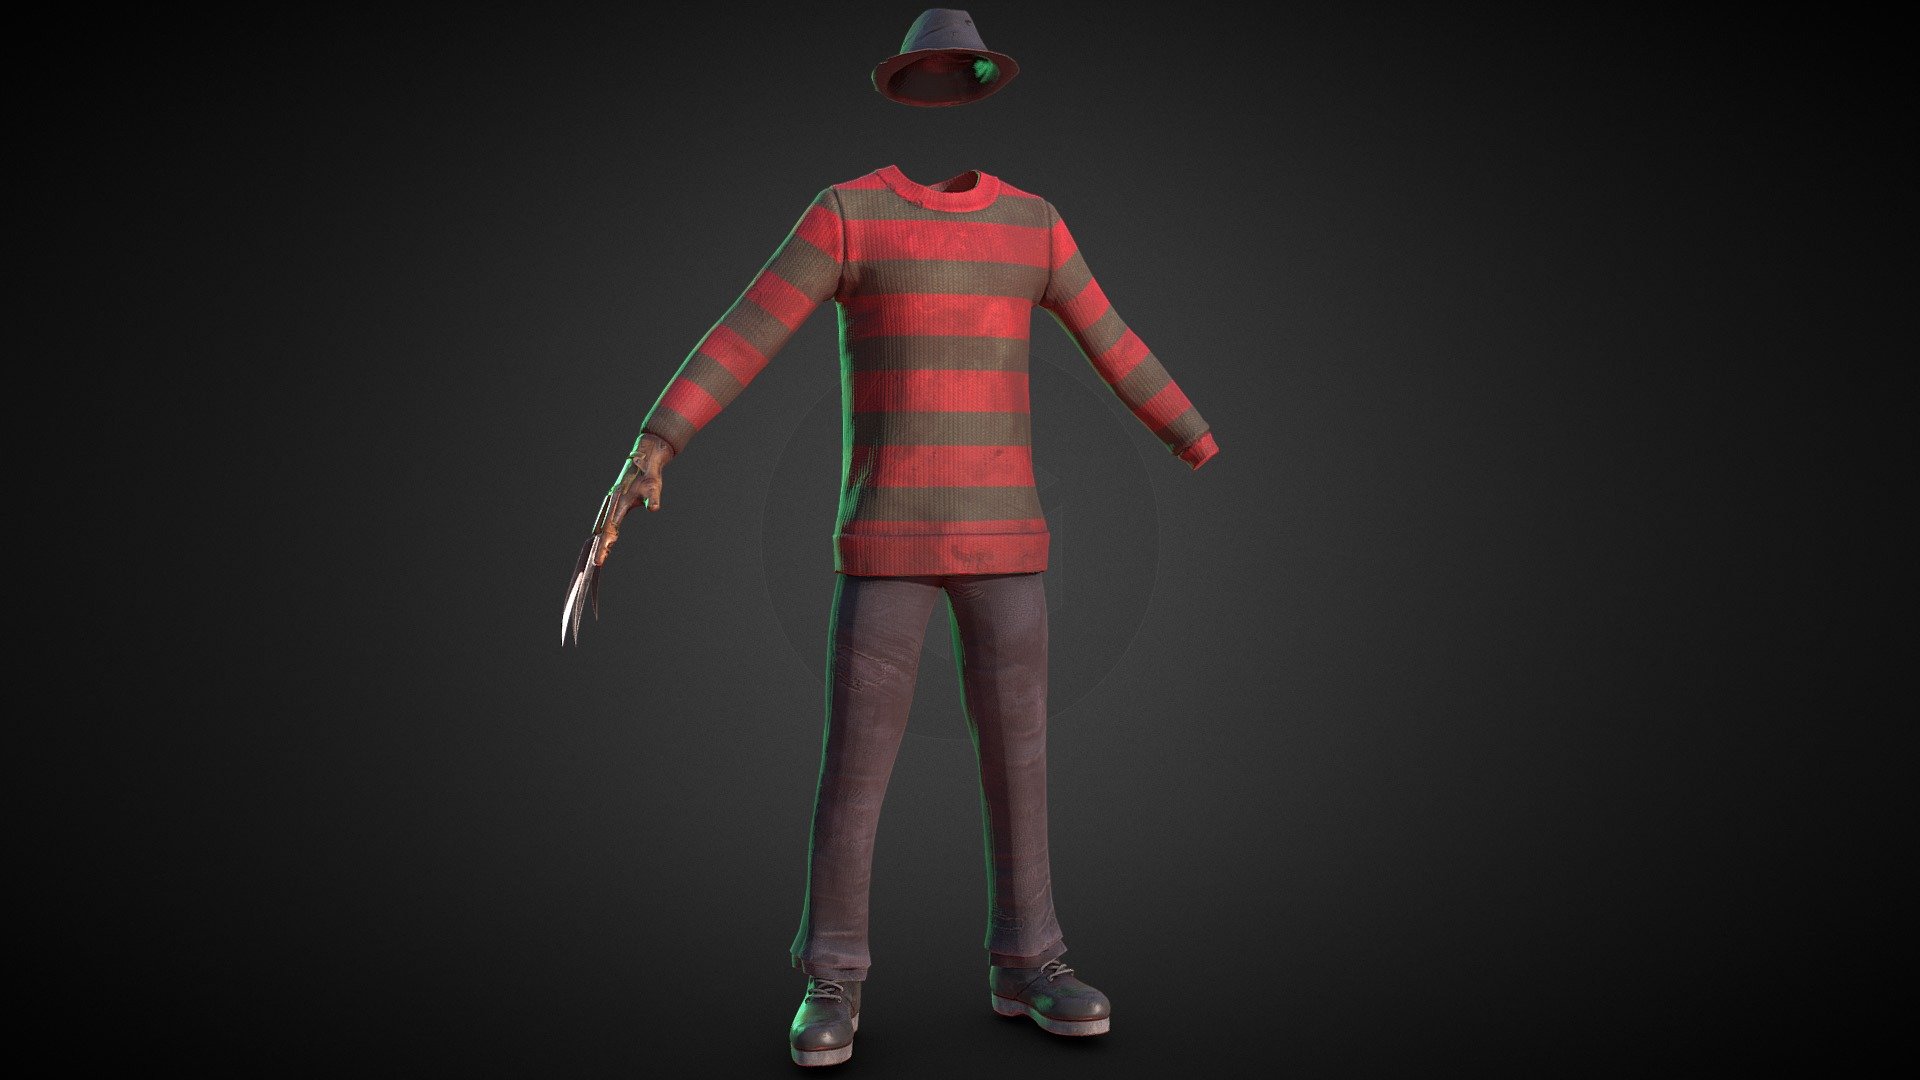 Note: If you purchased this set, you can have the individual claw set here:https://skfb.ly/o7wRD for free, just message me about it.

4K texture with 2 sets of UVs, the claw's UV are redistributed into one of the set. mb. files are included.

The Halloween theme continues!

The freddy costume is now done, I'll put a face on it on the next one.

I didn't include the hand and the face just so if people want to they can insert their own characters.
The shoe straps and most detail are intentionally put in- which you wouldn't do to a game characters; and can be easily modified.

Again, if you purchase this version and want the singular glove model feel free to message me.

2021/10/19 - Halloween_Freddy's Costume Set - Buy Royalty Free 3D model by Armored Interactive (@ychiang6) 3d model